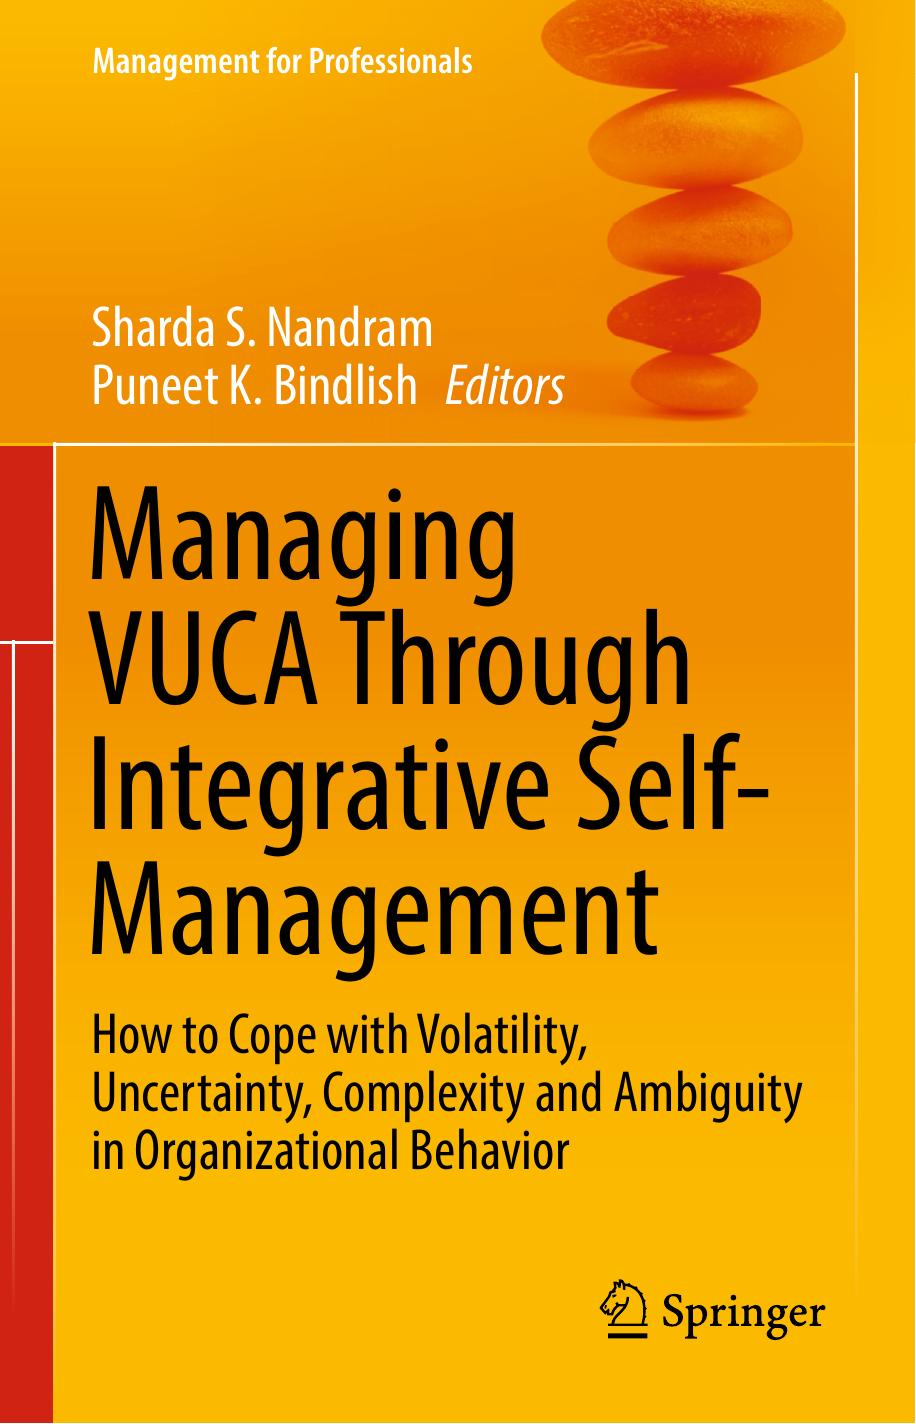 Managing VUCA Through Integrative Self-Management  How to Cope with Volatility, Uncertainty, Complexity 2017